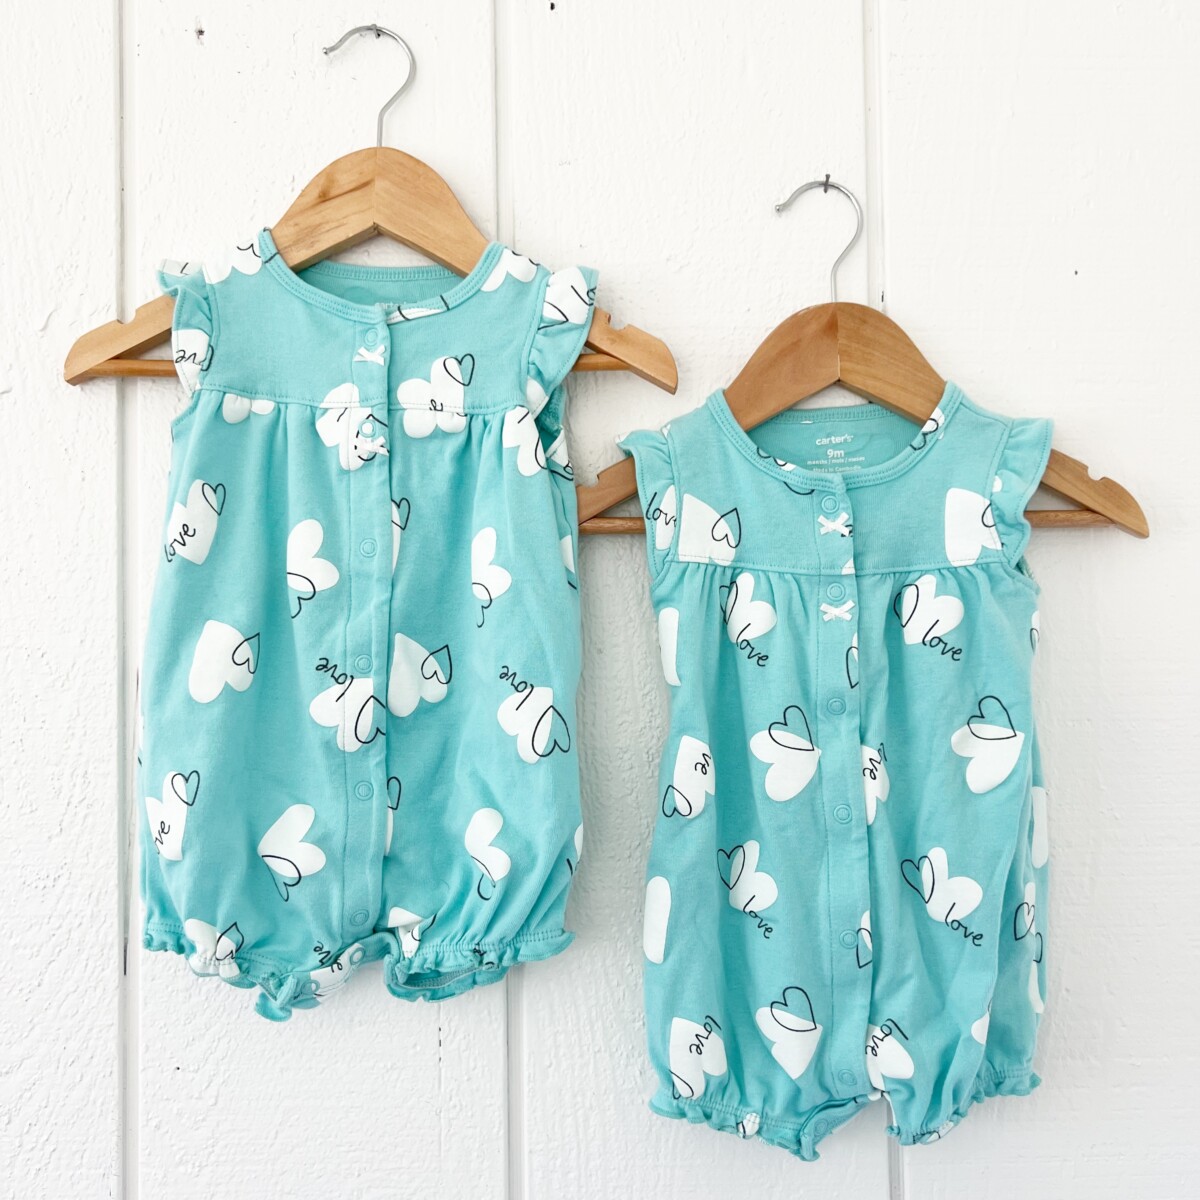 Shop Matching and Coordinating Twin and Triplet Clothes - SameSame Kids